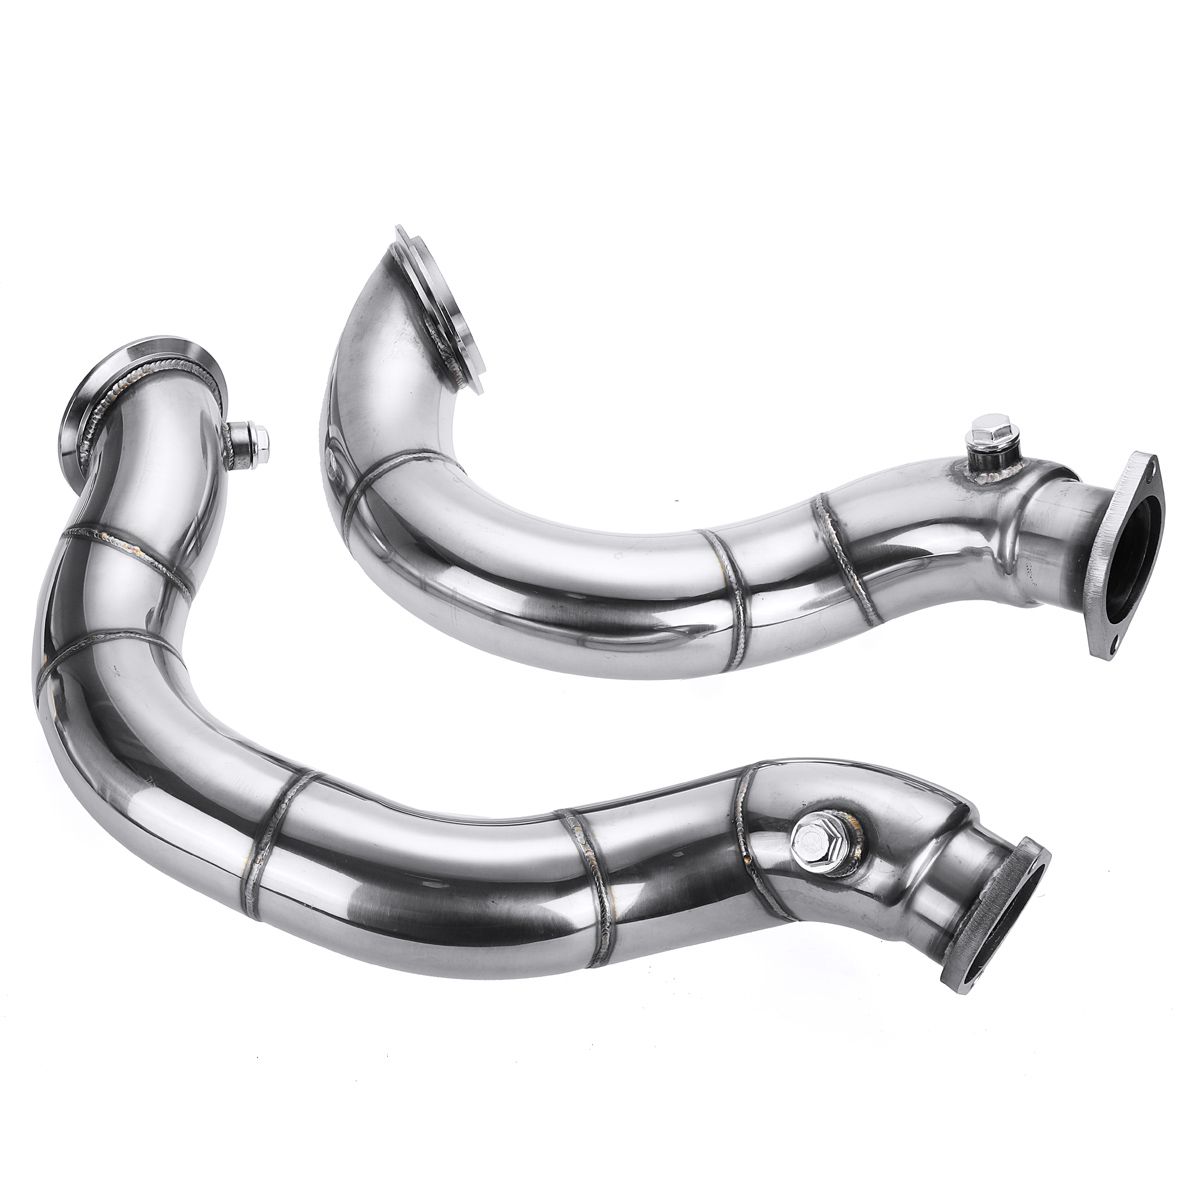 Stainless-Steel-Exhaust-Pipe-Muffler-Decat-Downpipe-for-BMW-N54-E90-E91-E92-E93-E82-135i-335i-Twin-T-1701729